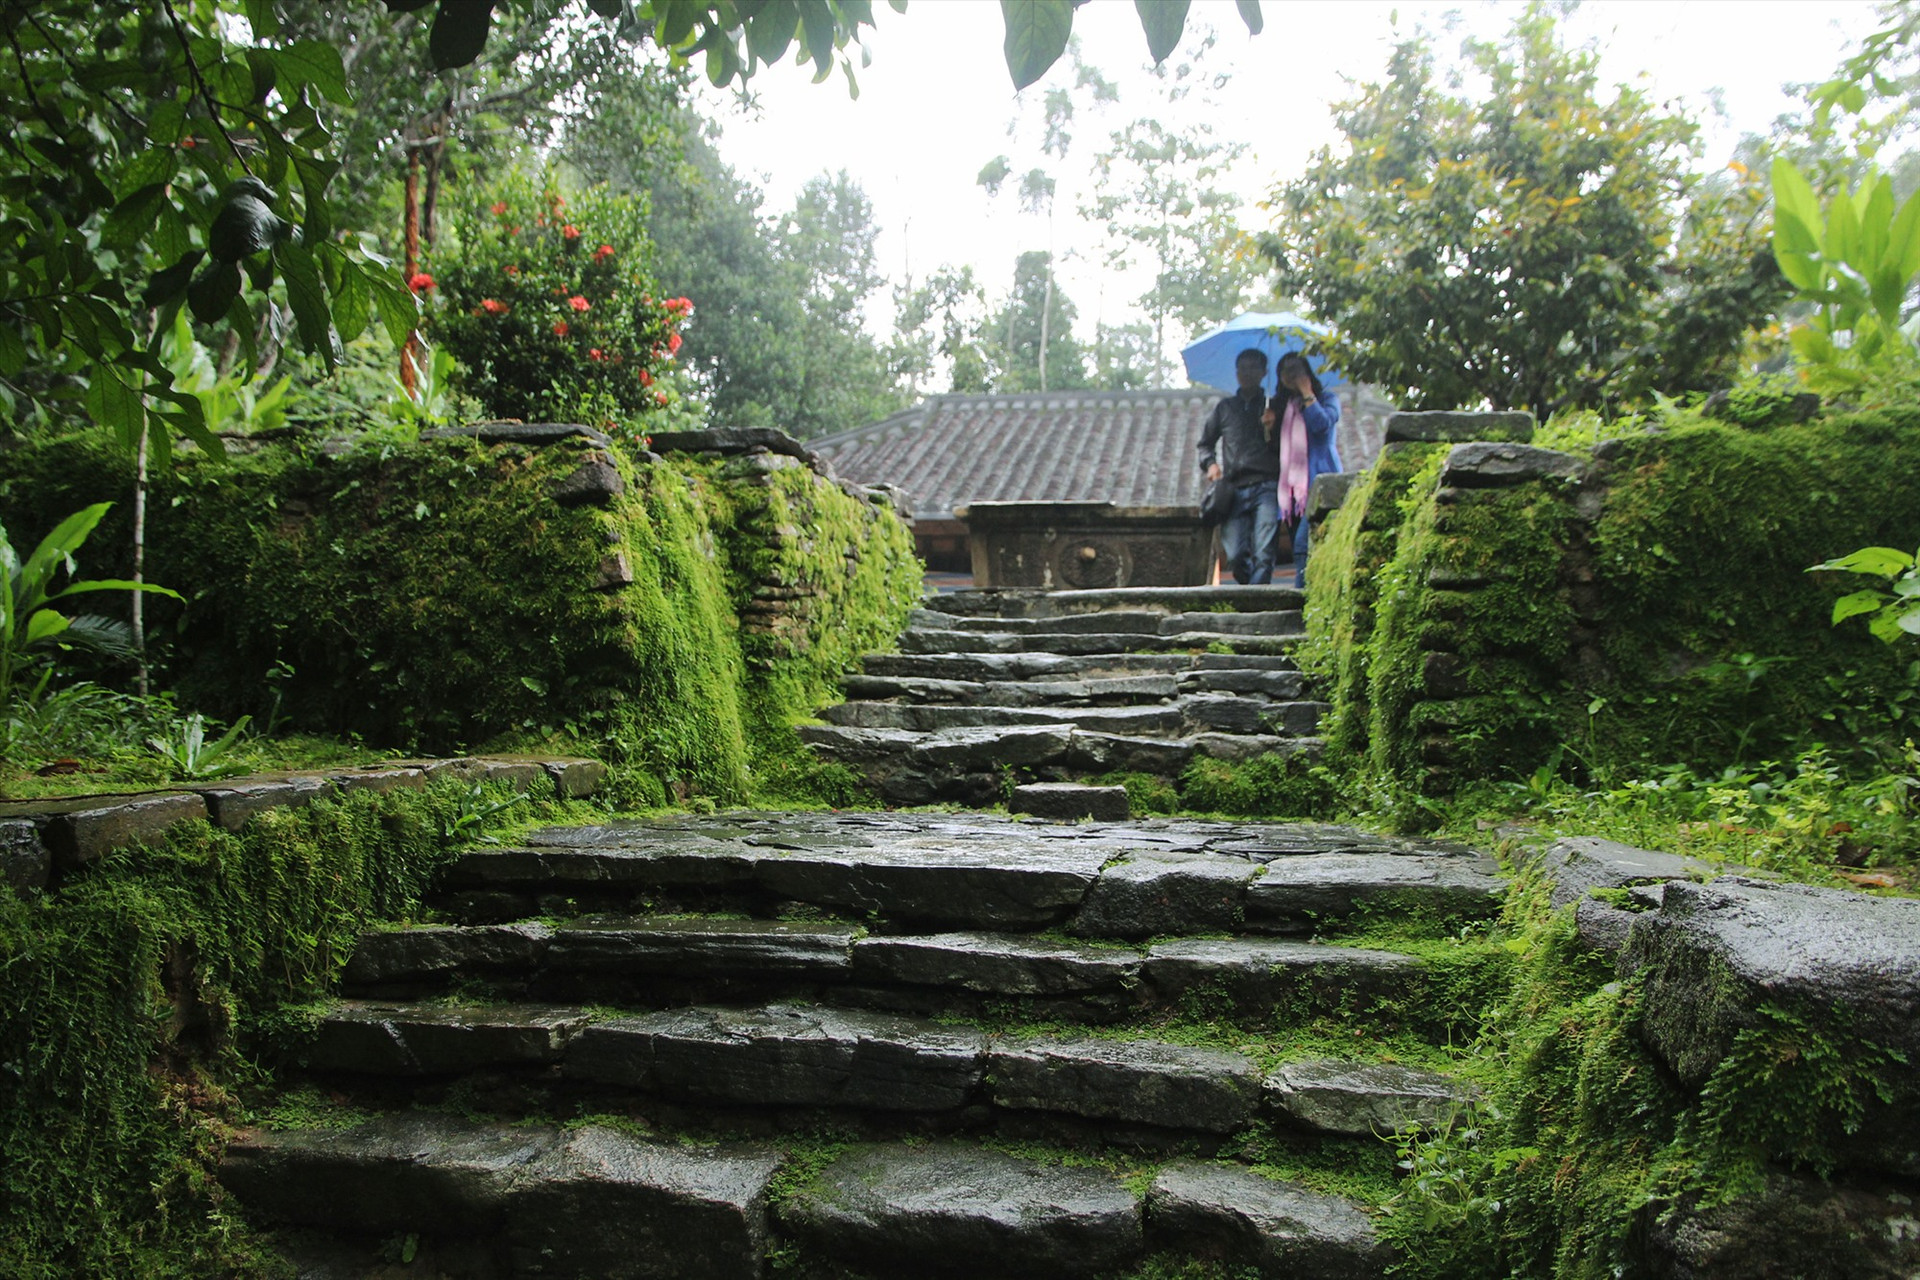 A mossy stone alley leading to an ancient house